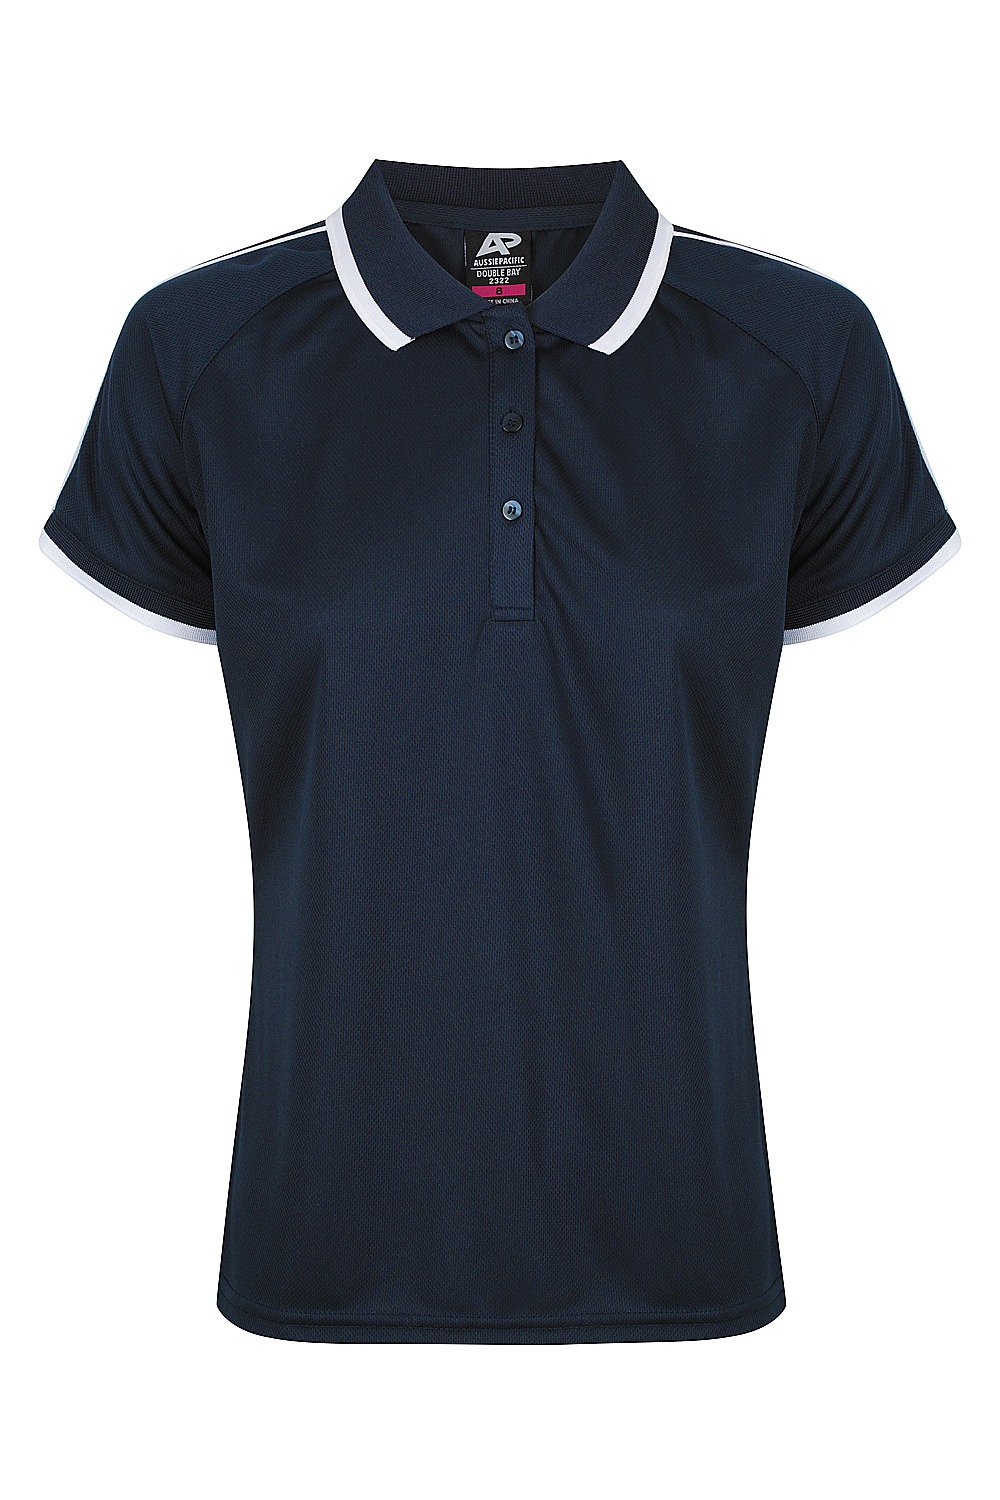 DOUBLE BAY LADY POLOS - 2322